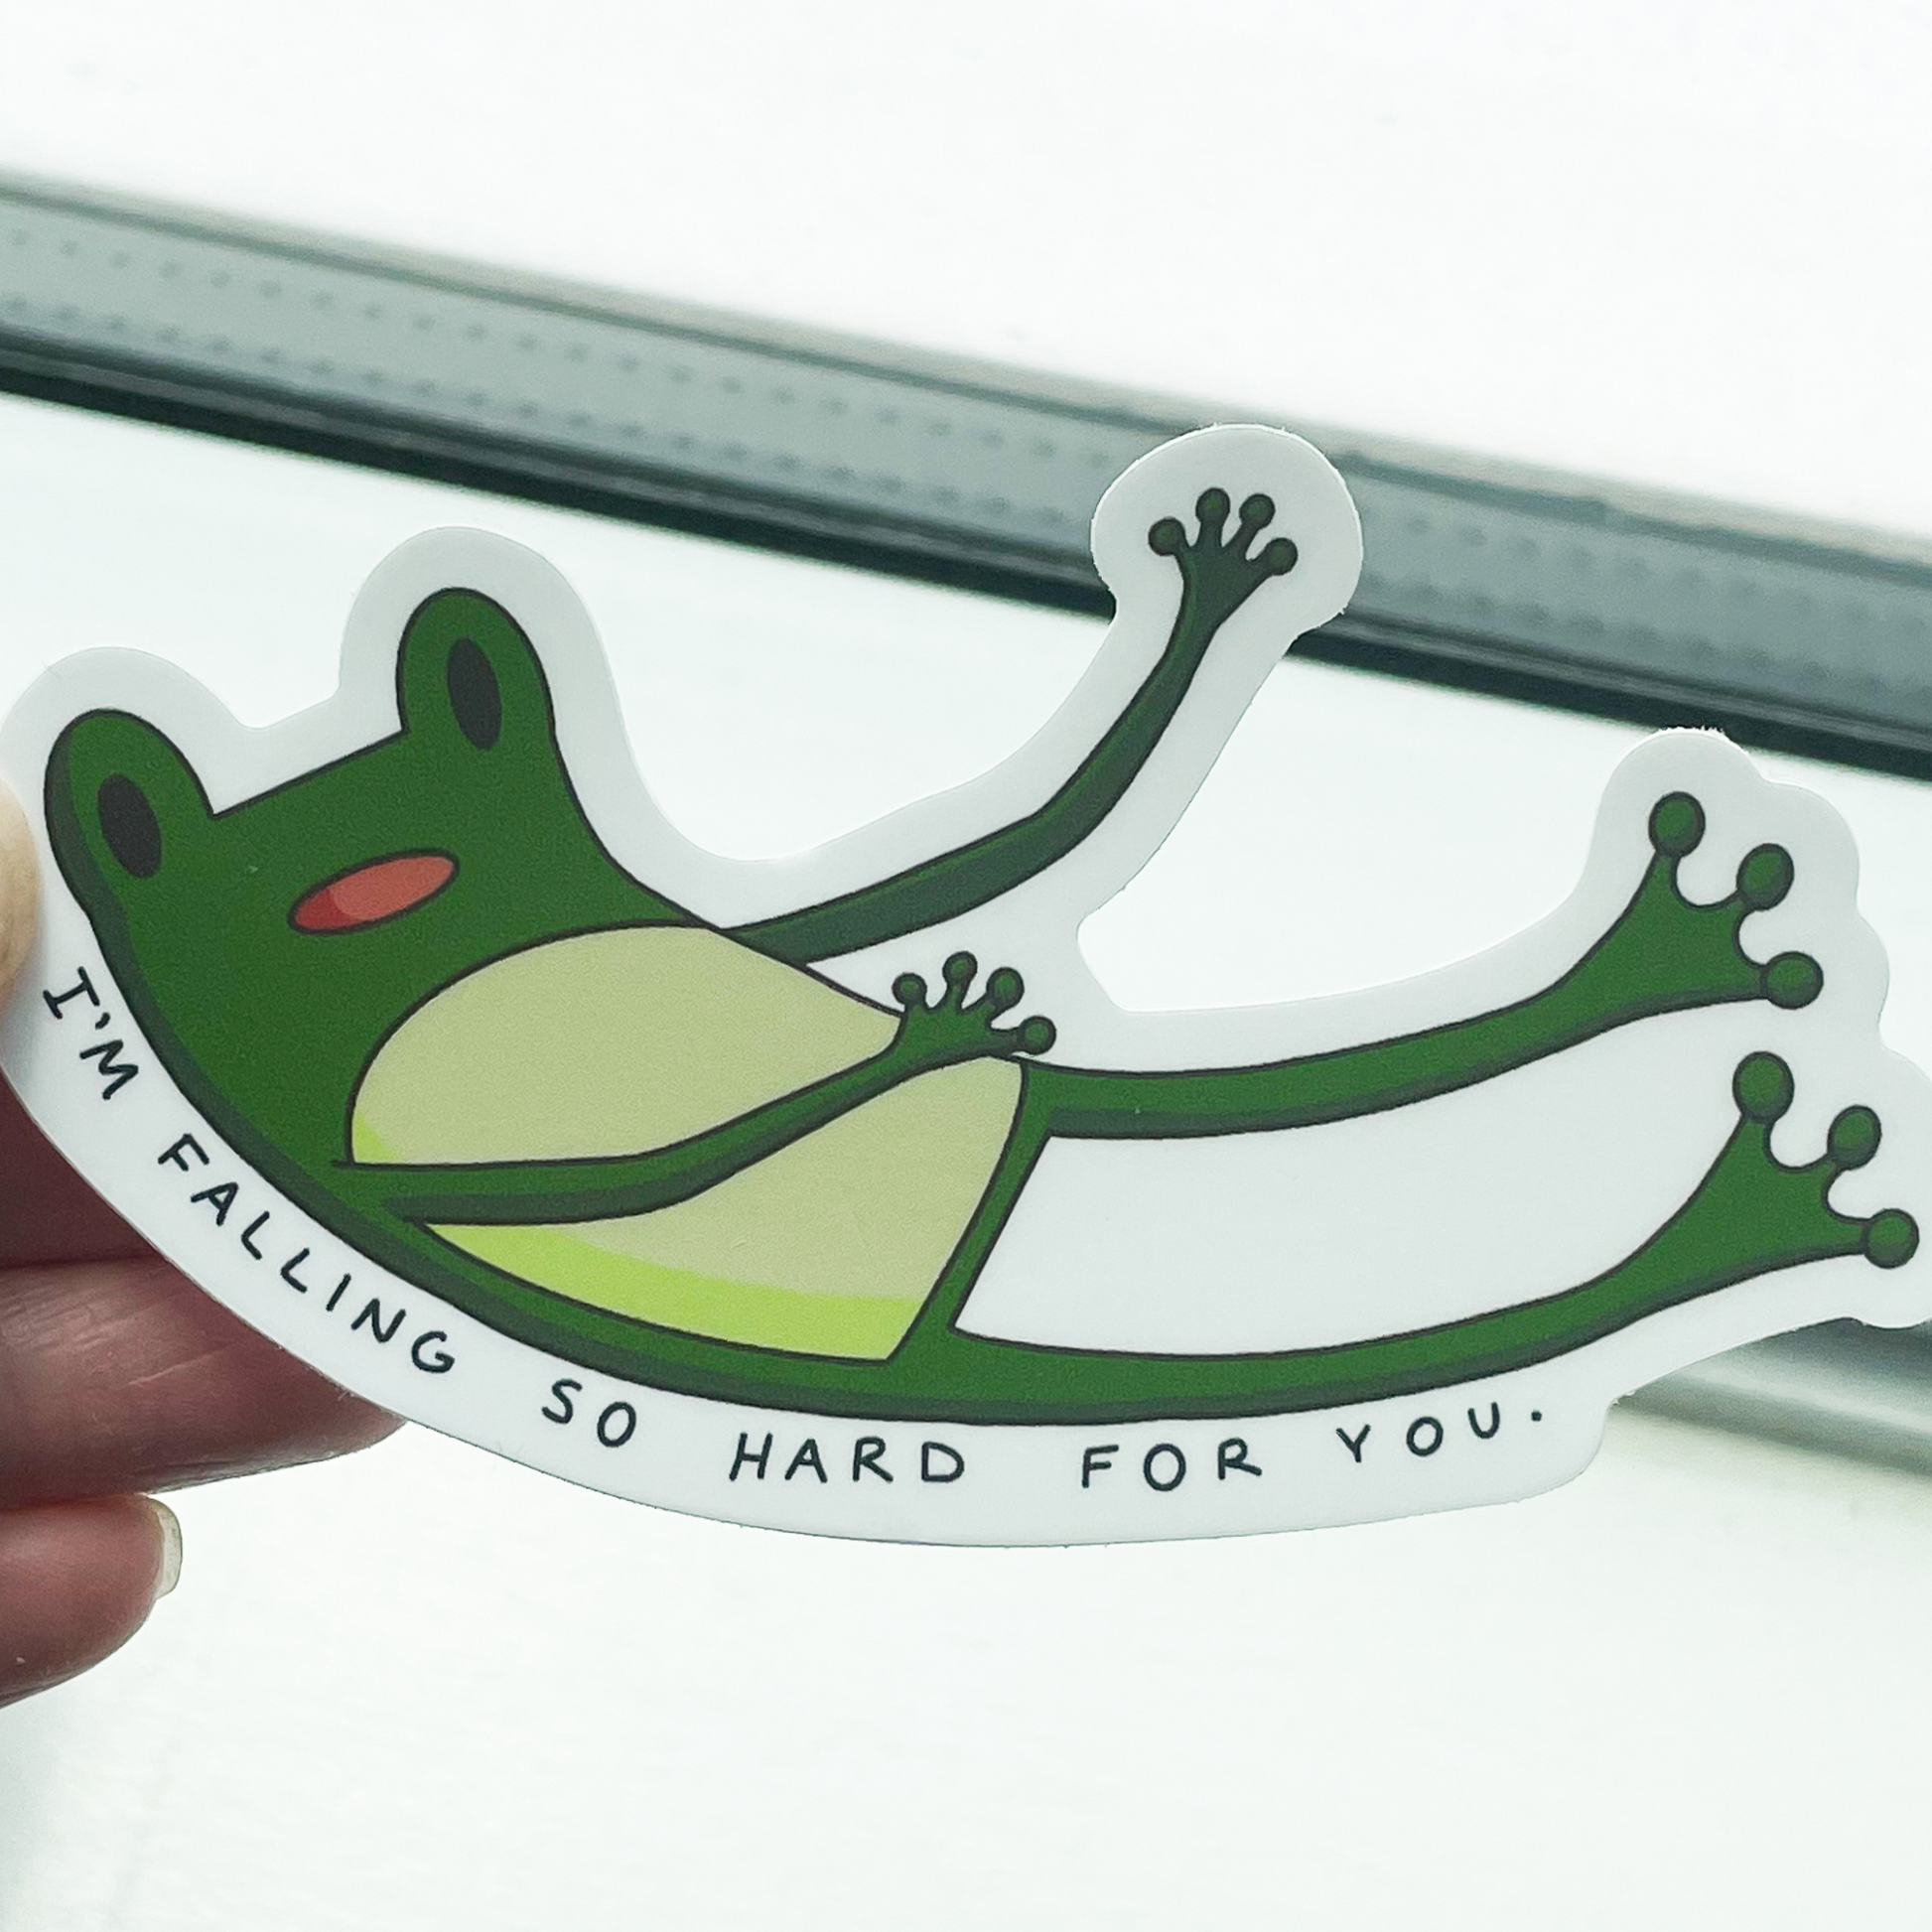 A hand holding a sticker of a green cartoon frog falling with the words "I'M FALLING SO HARD FOR YOU." underneath on a white background.